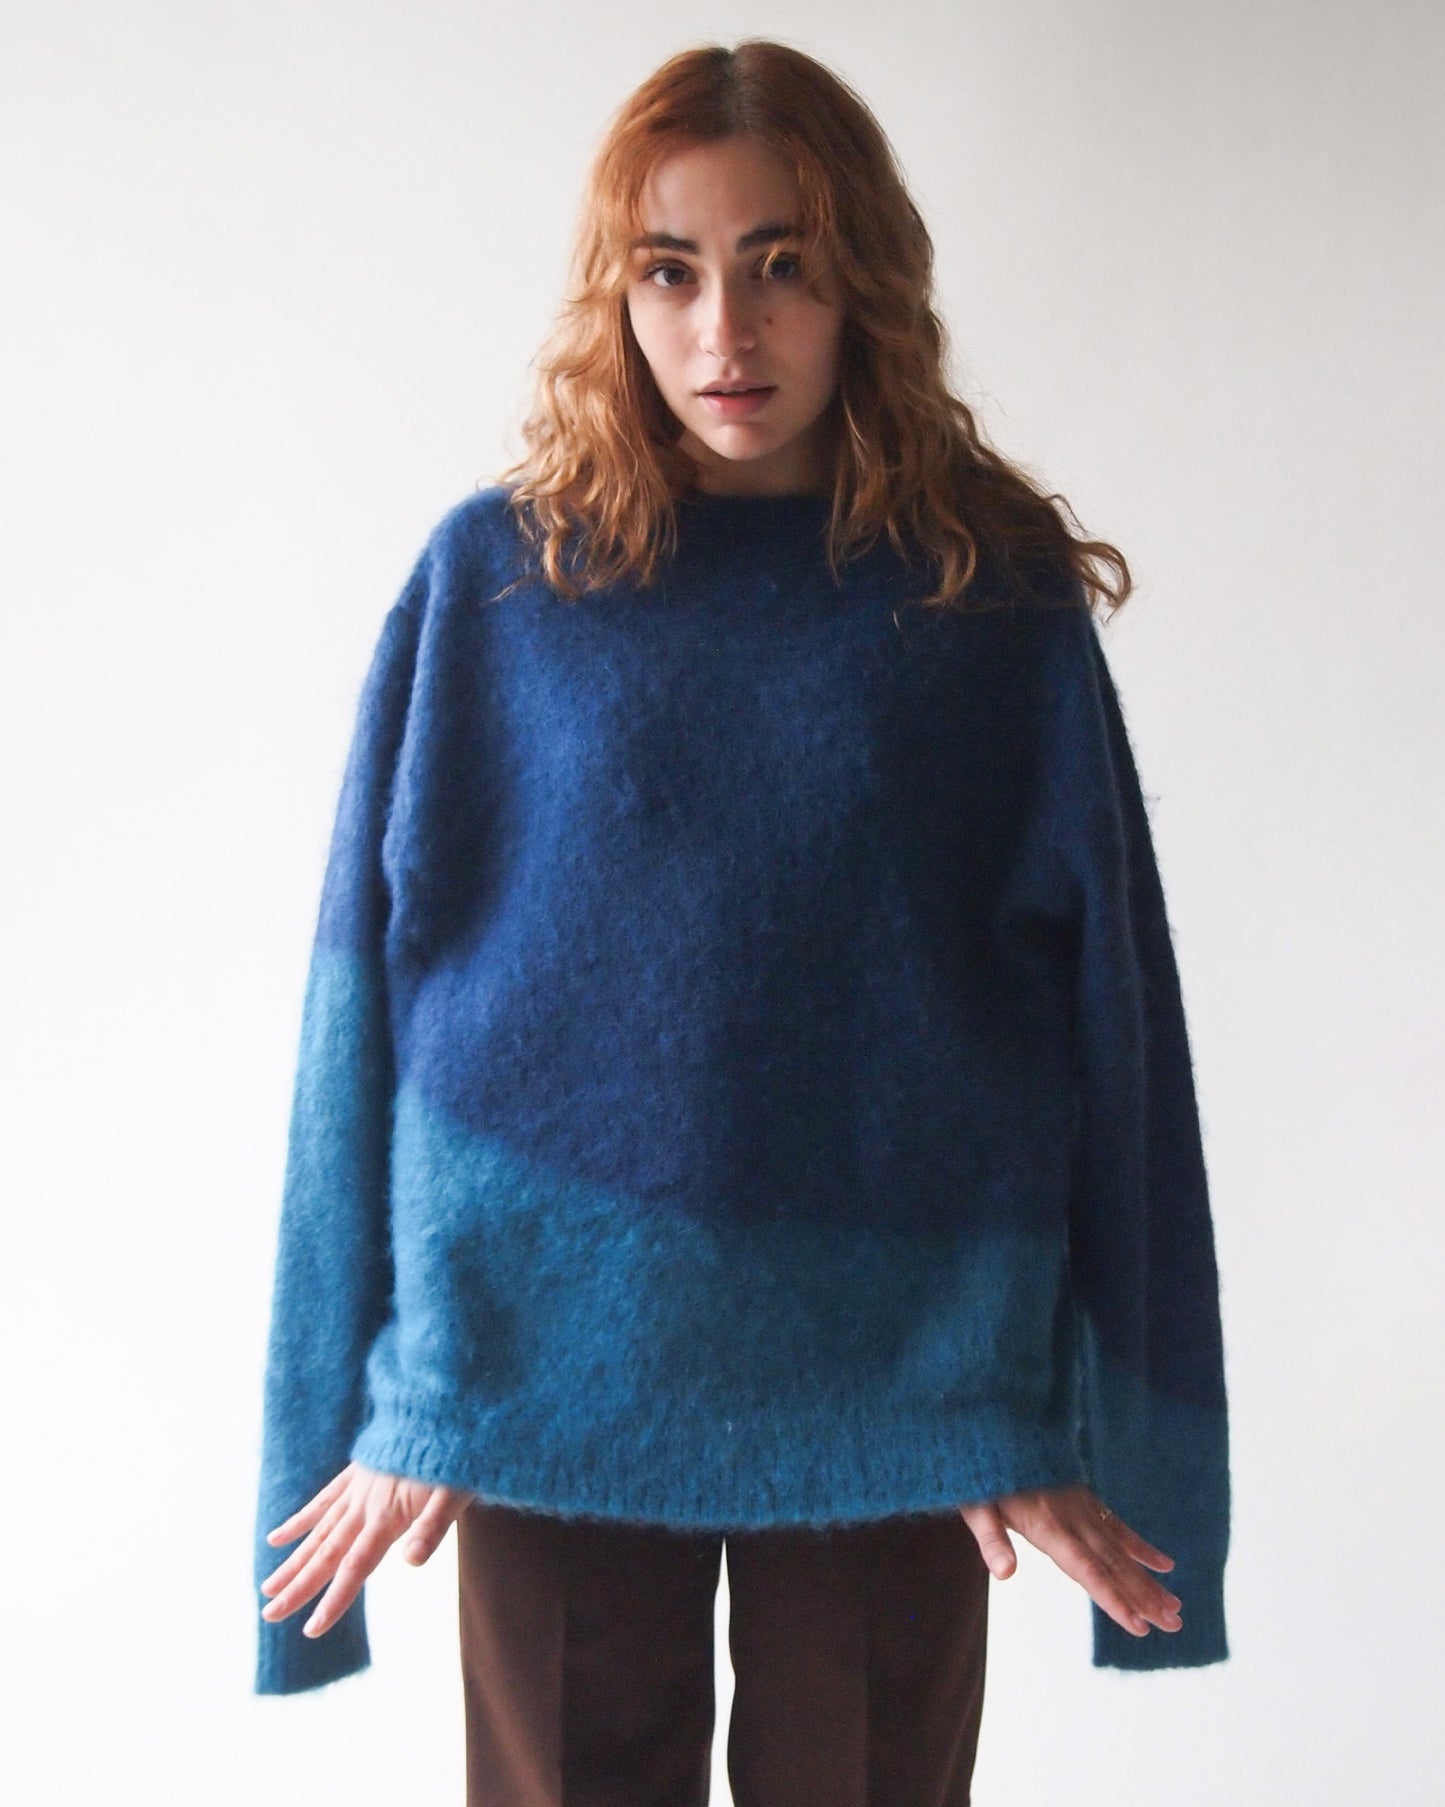 404 Art Inspired Mohair Sweater  Untitled - 1